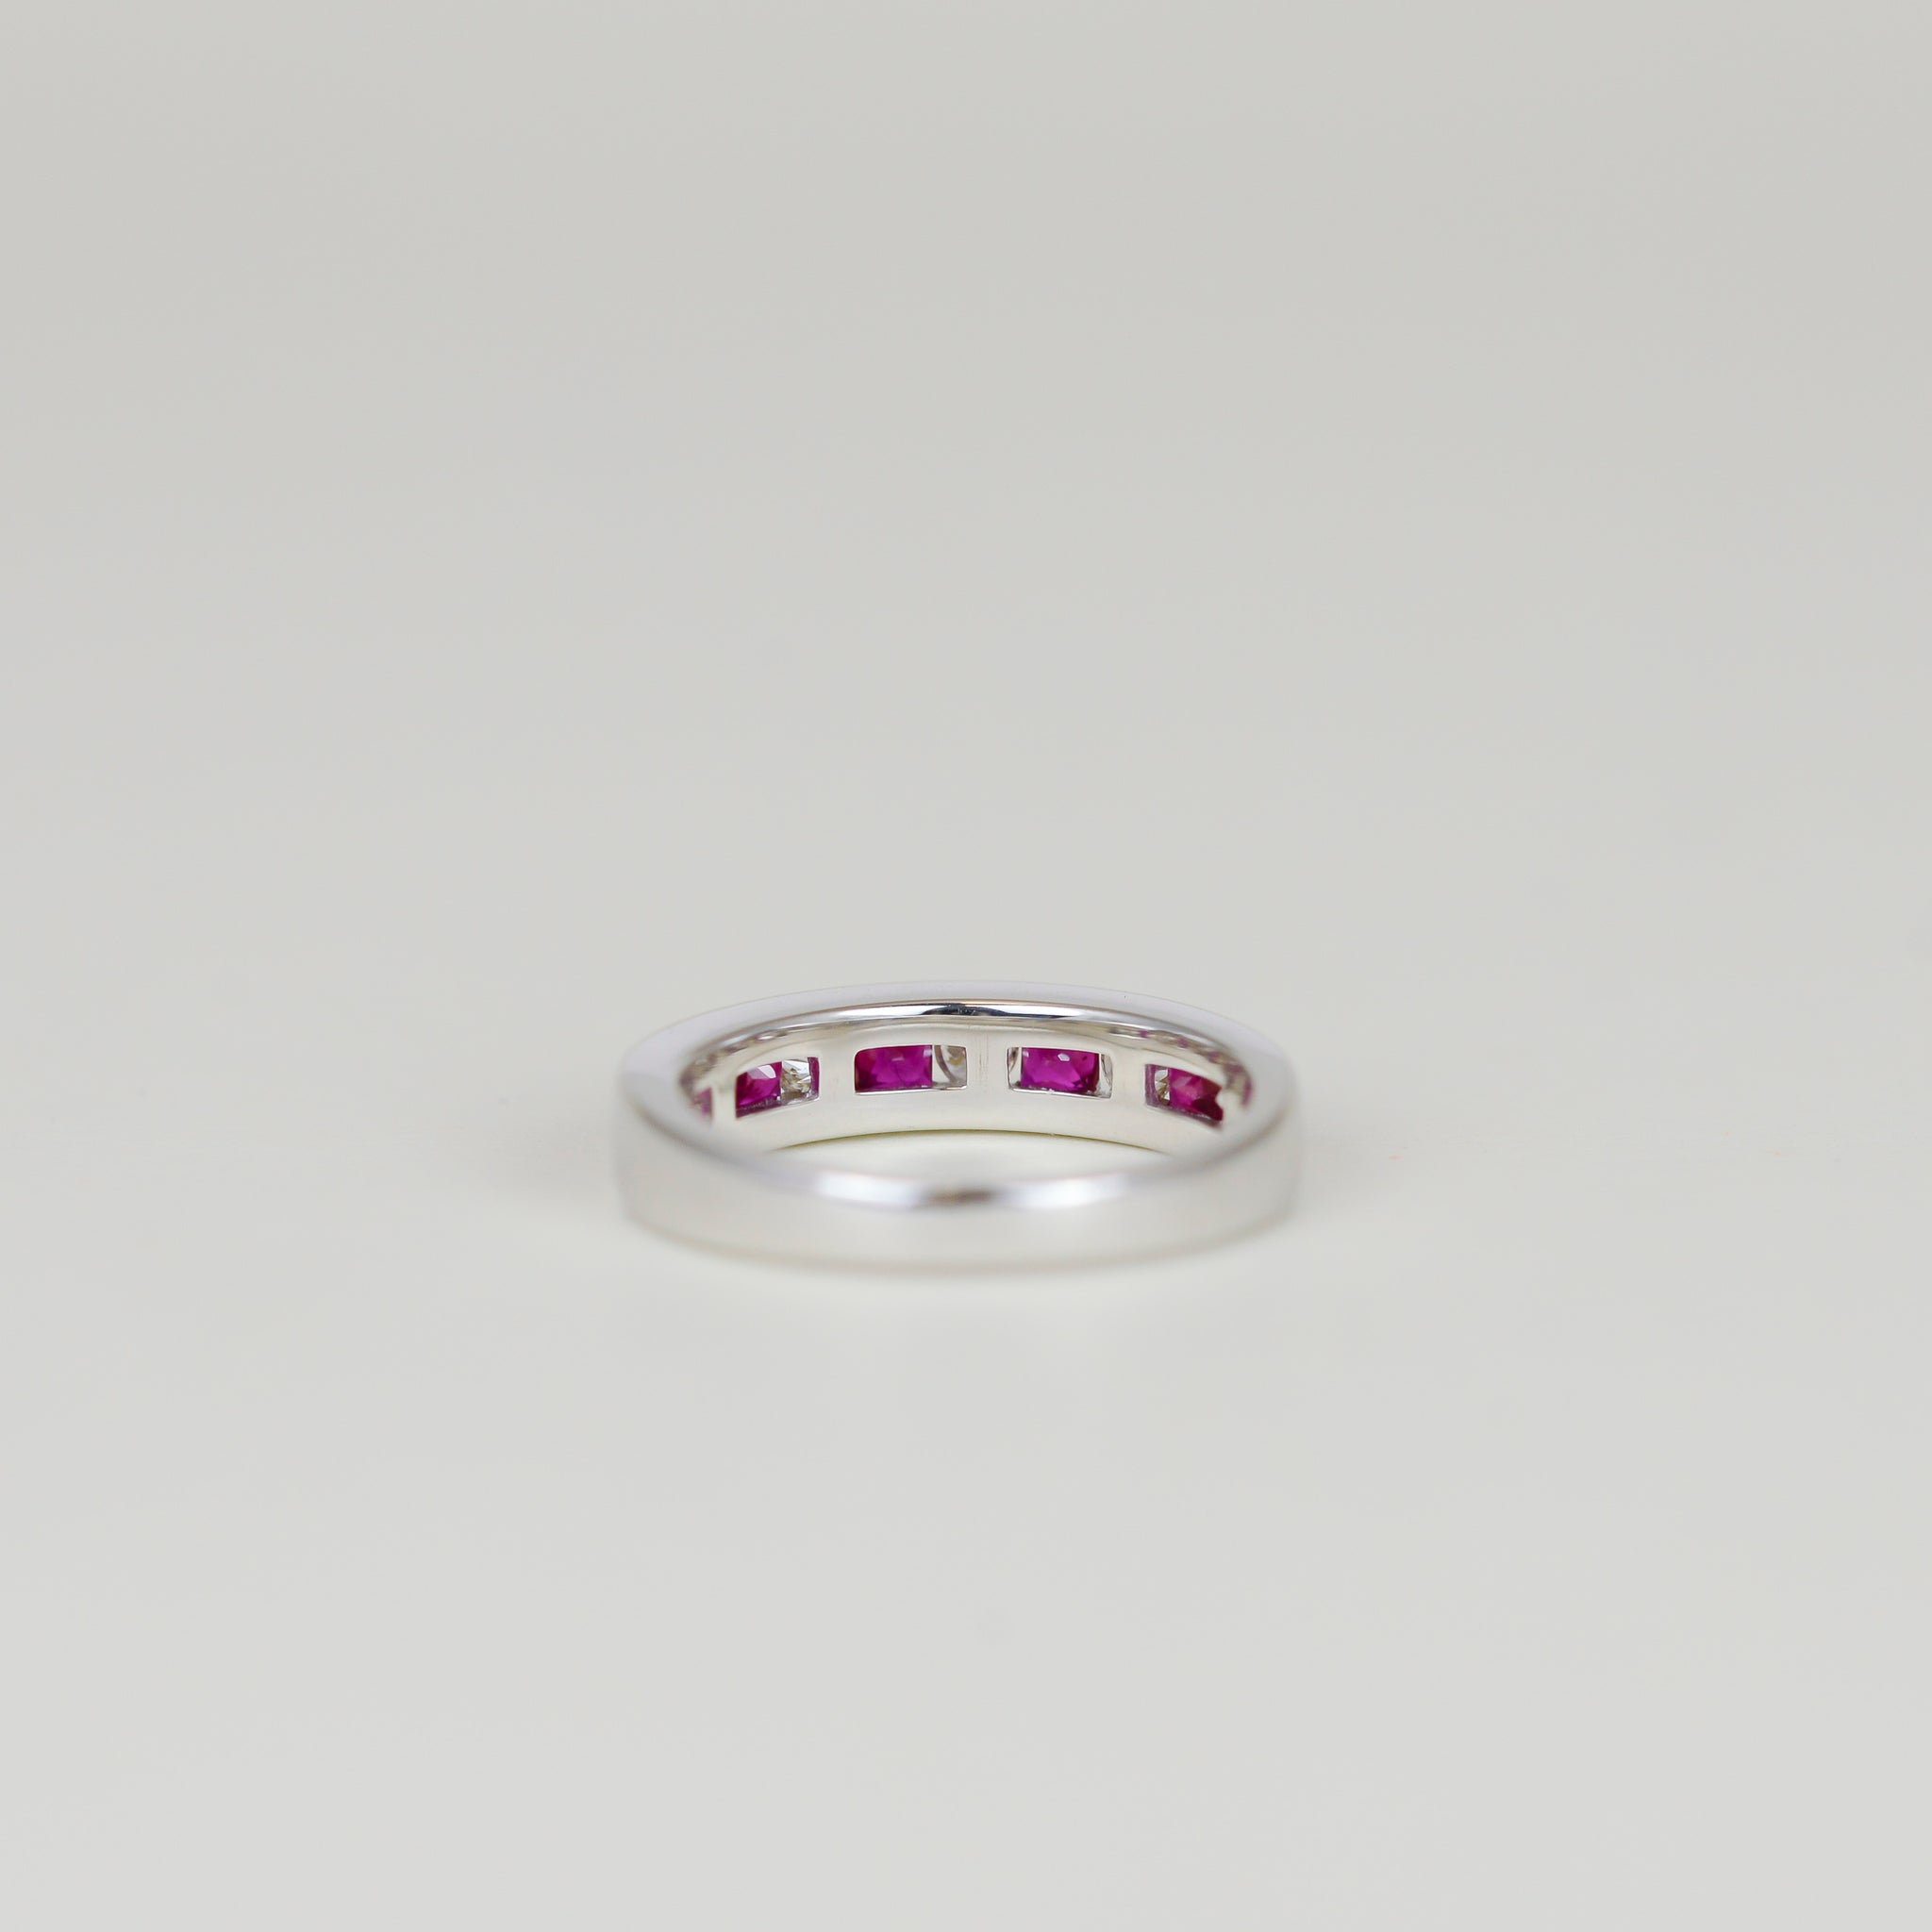 18ct White Gold 0.56ct Channel Set Ruby and Diamond Half Eternity Ring